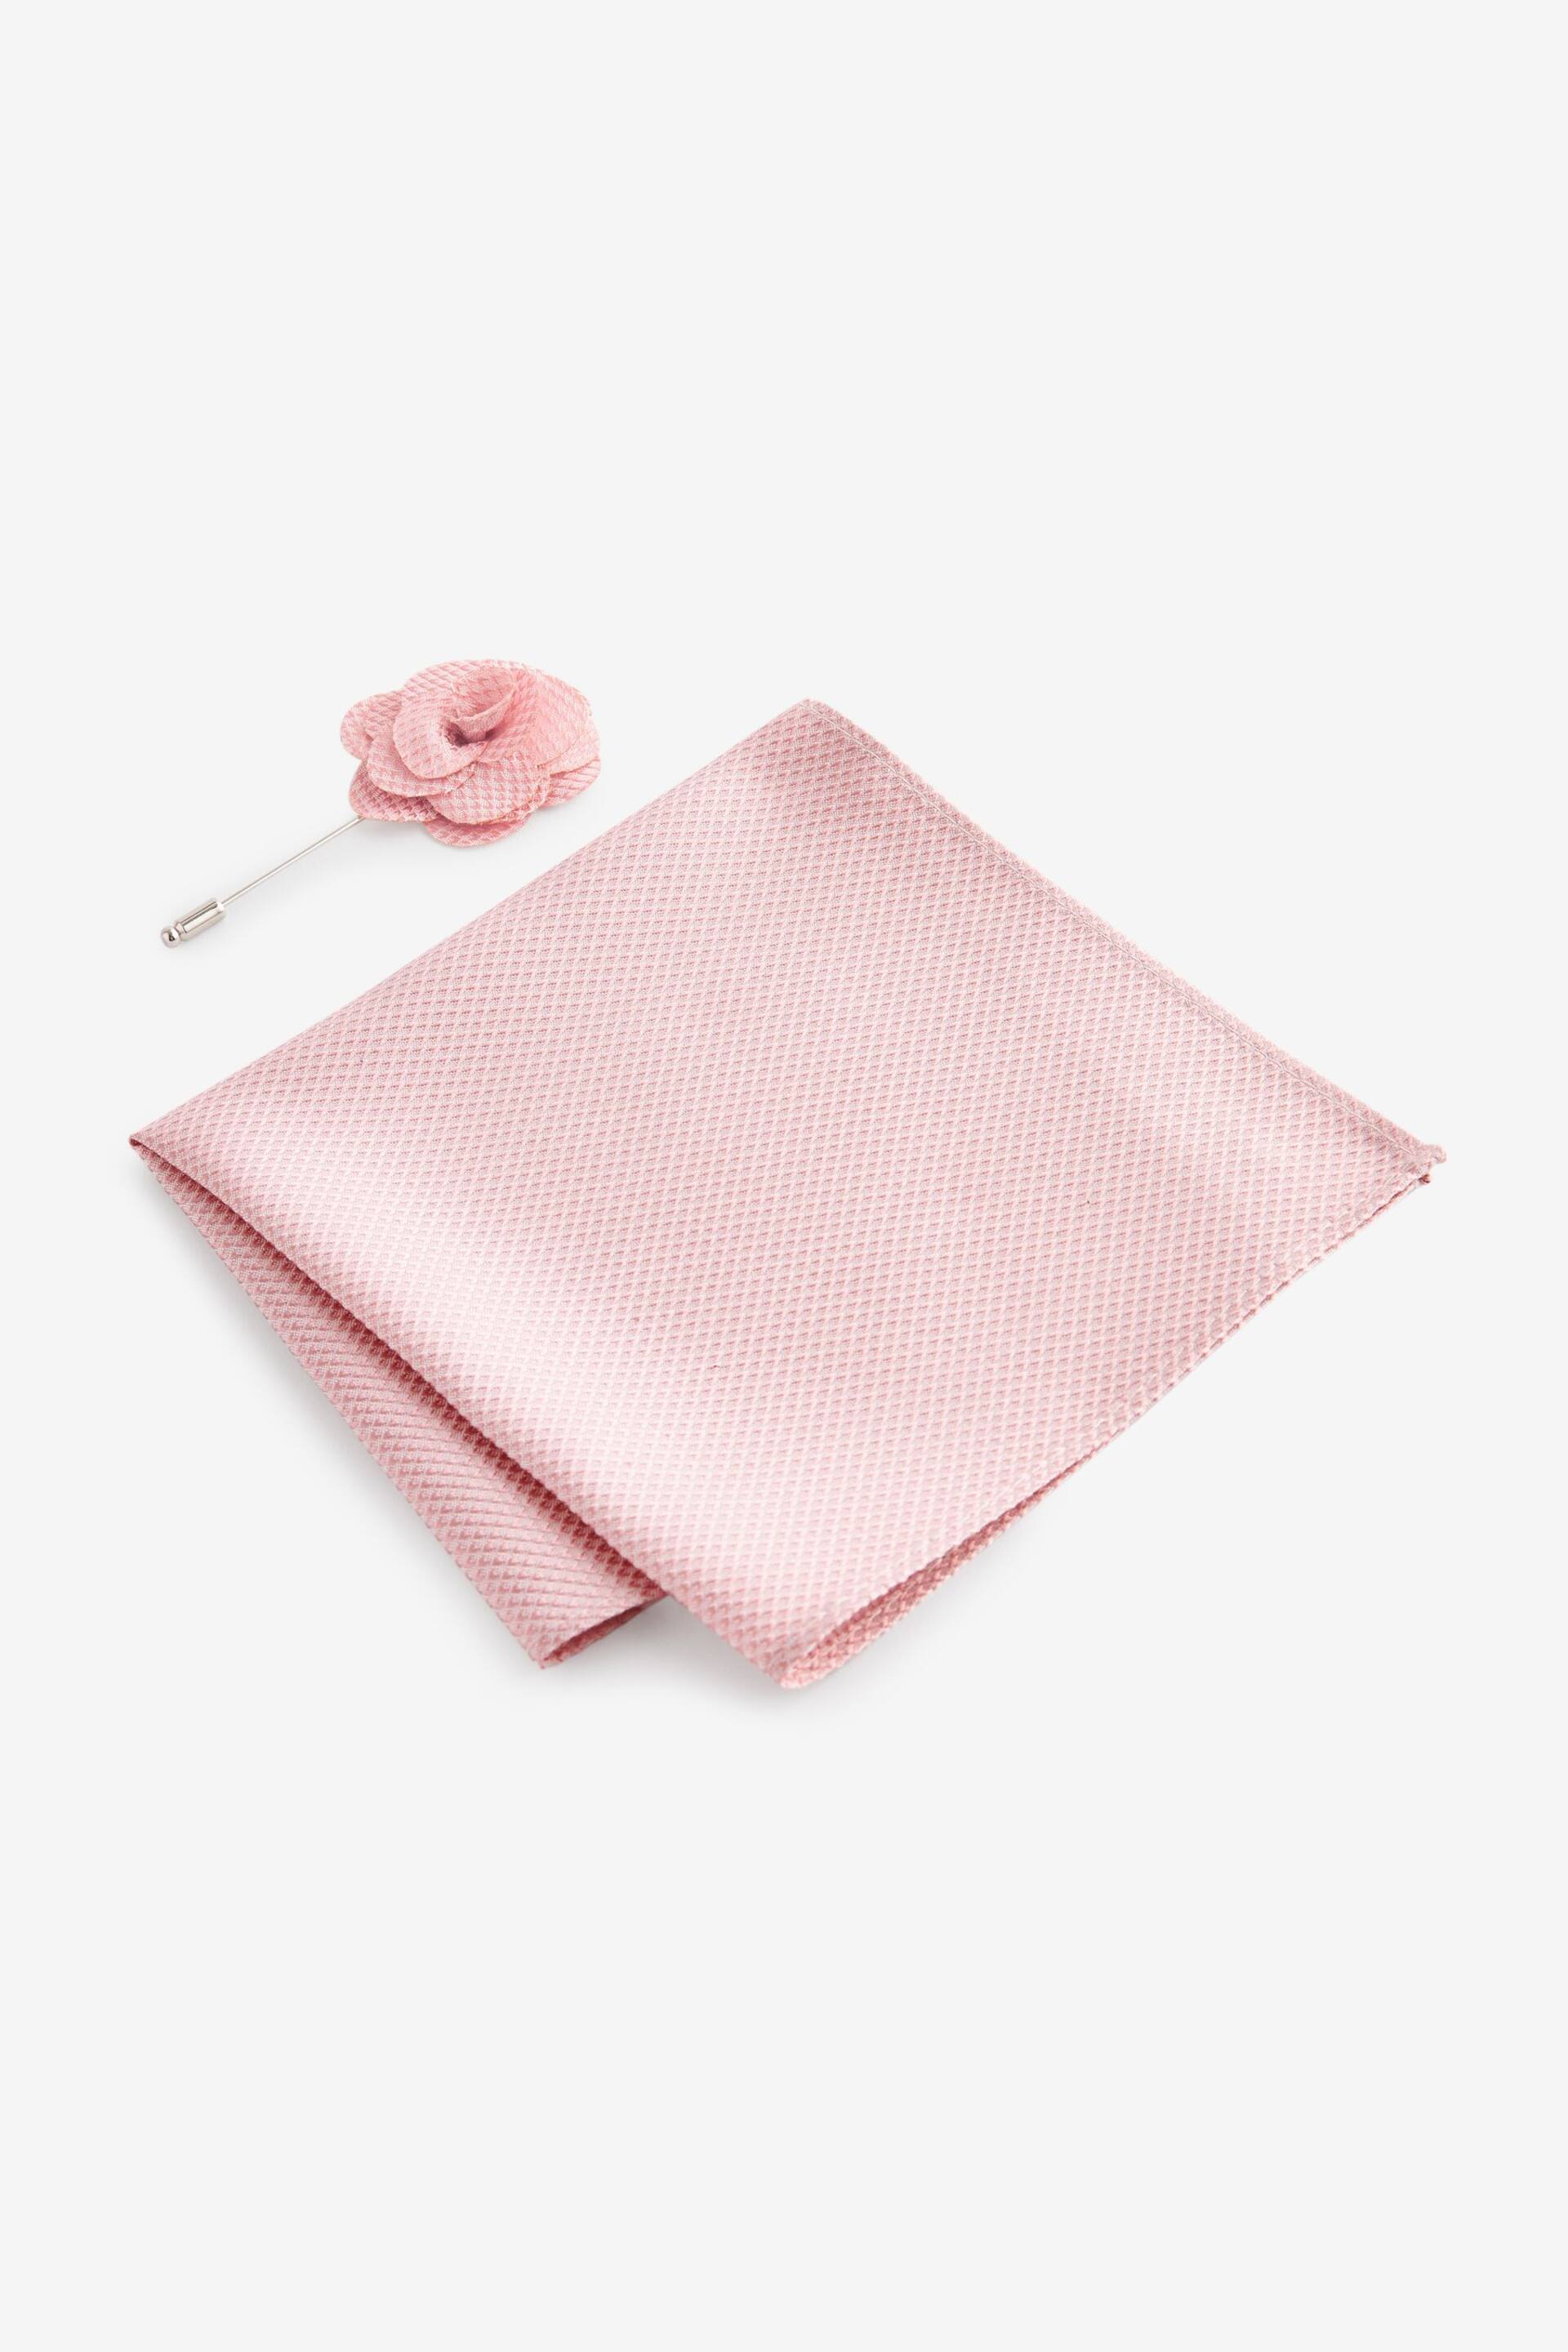 Icy Pink Textured Silk Lapel Pin And Pocket Square Set - Image 1 of 3